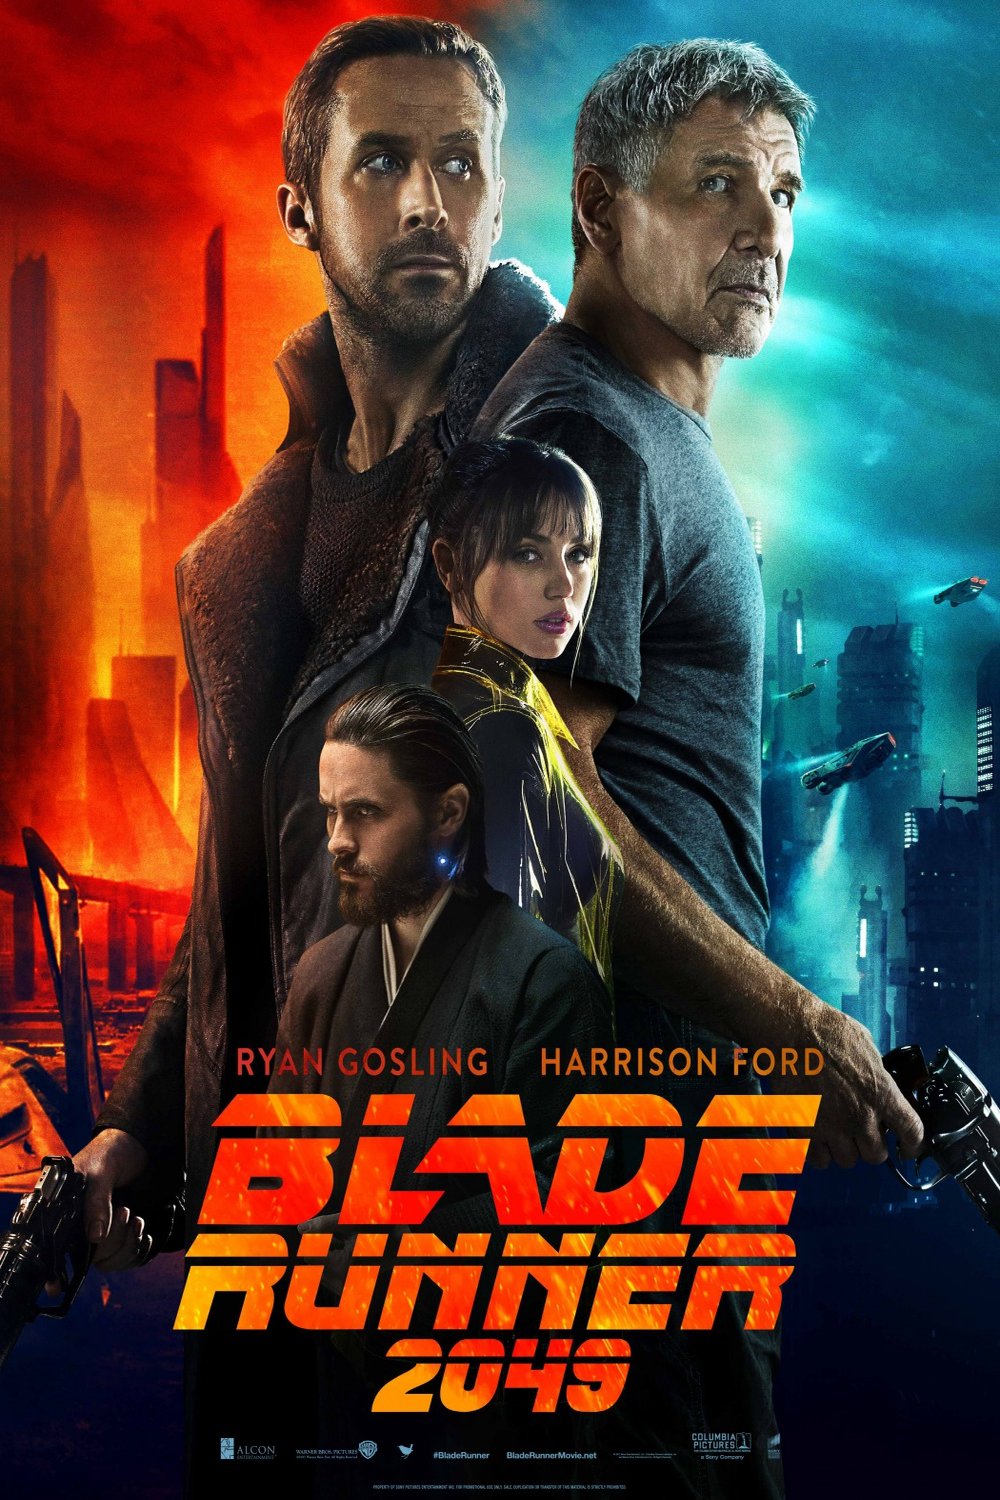 Poster of the movie Blade Runner 2049